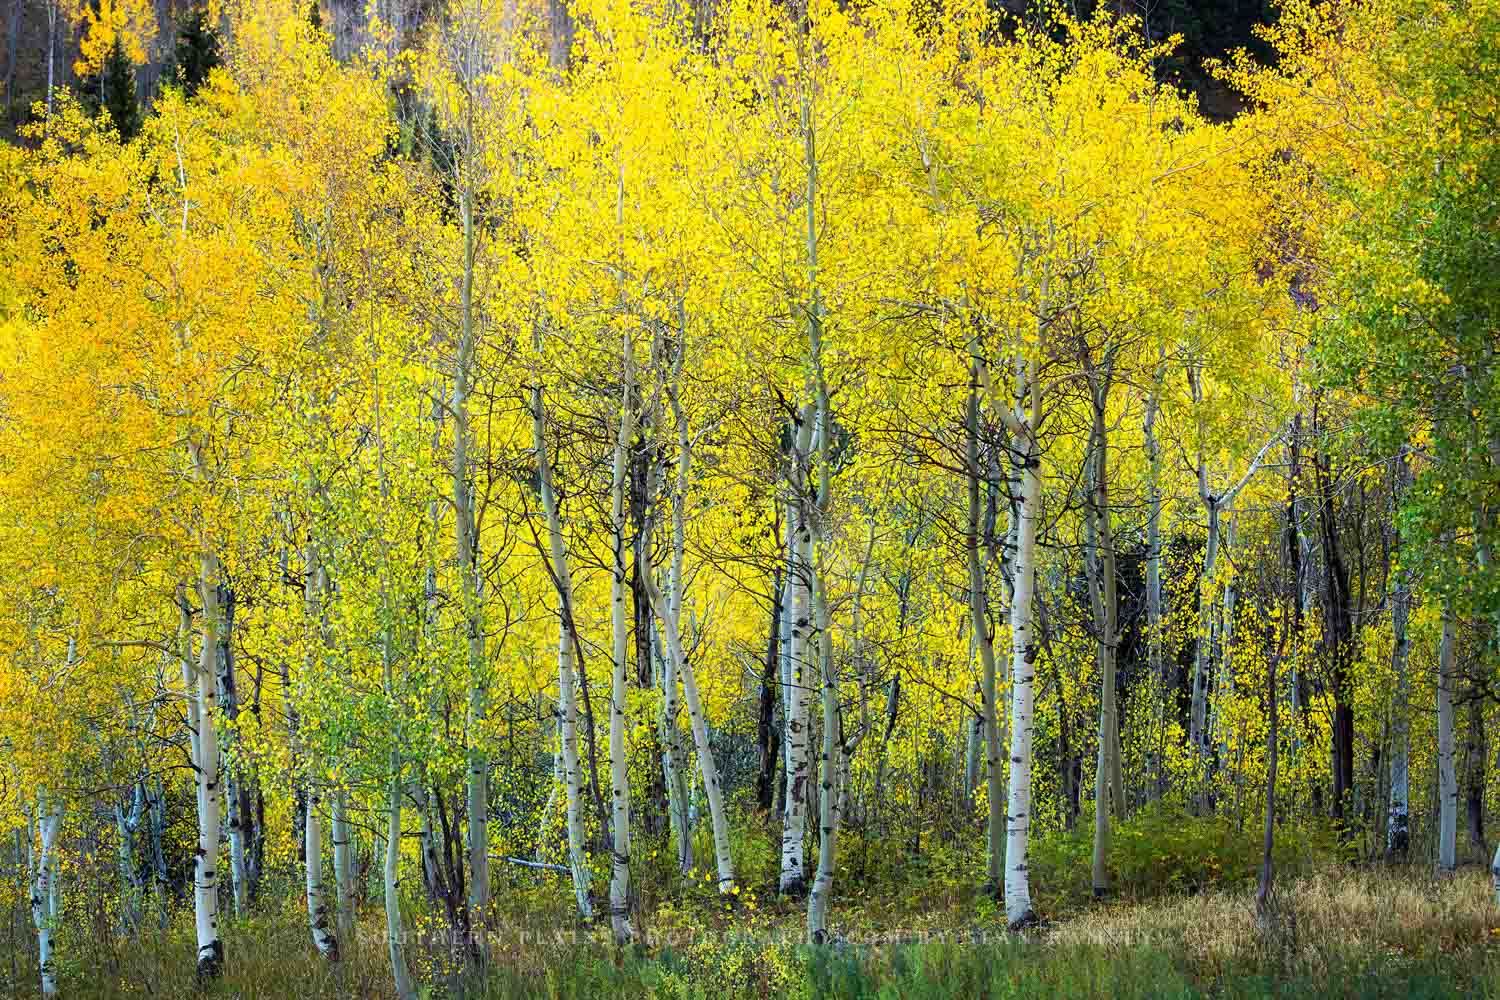 Nature photography print of golden aspen trees on an autumn day at the Maroon Bells in Colorado by Sean Ramsey of Southern Plains Photography.